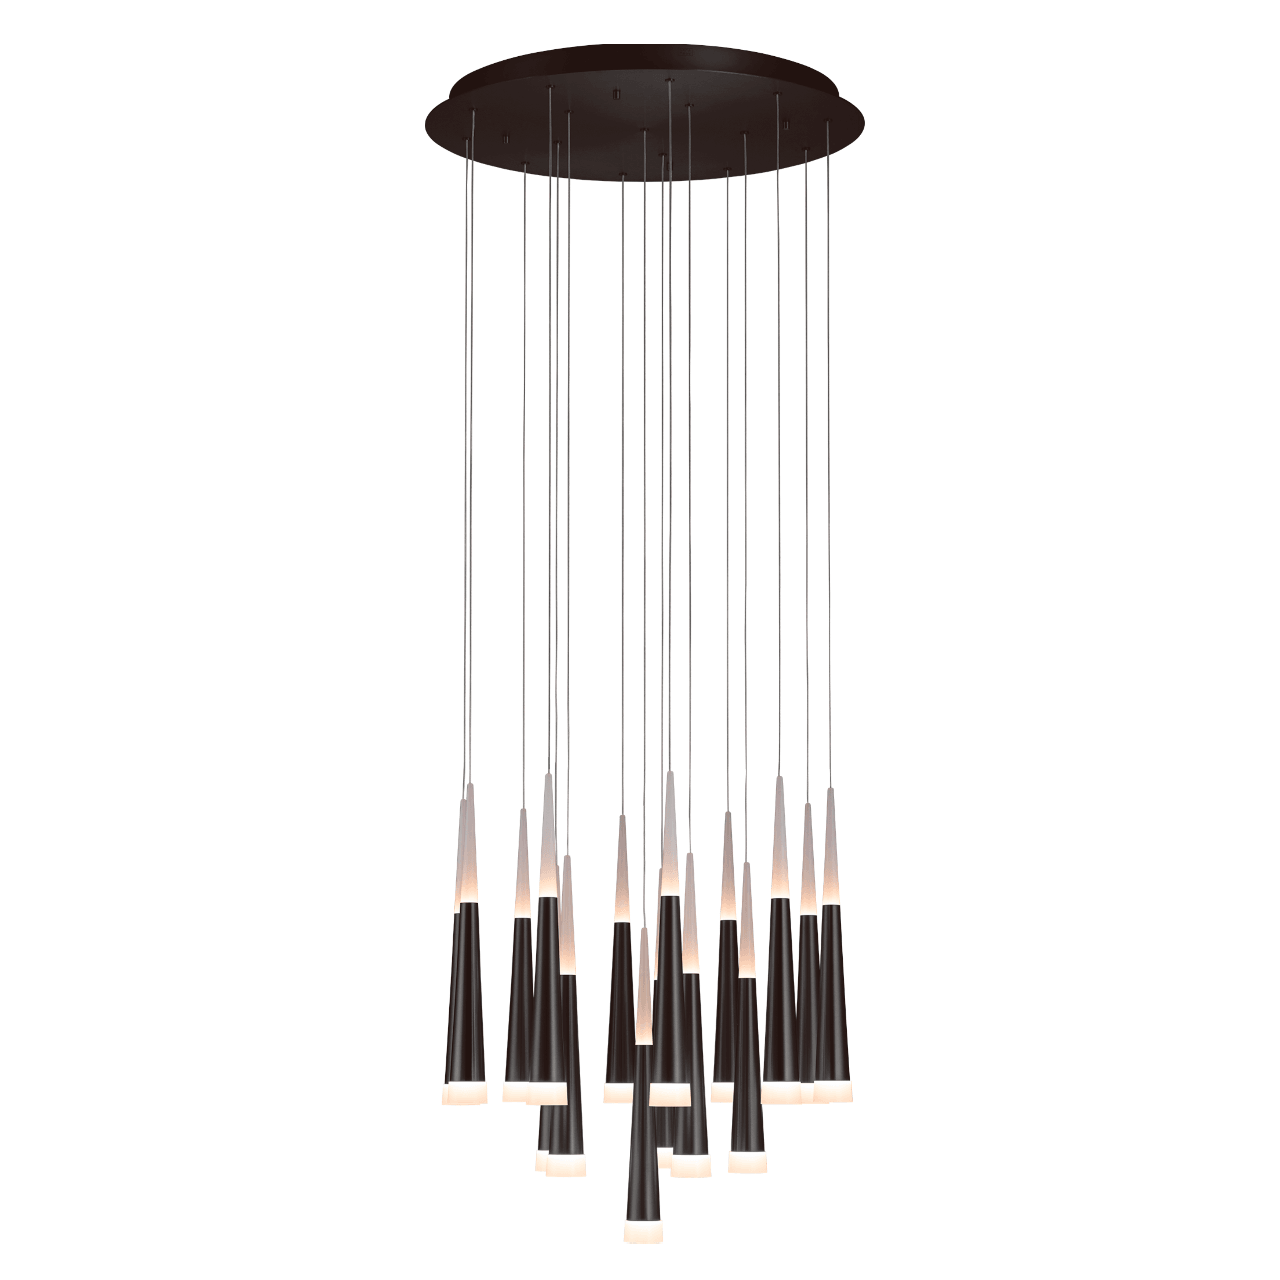 Pageone - Meteor (16). Chandelier - Hbdepot